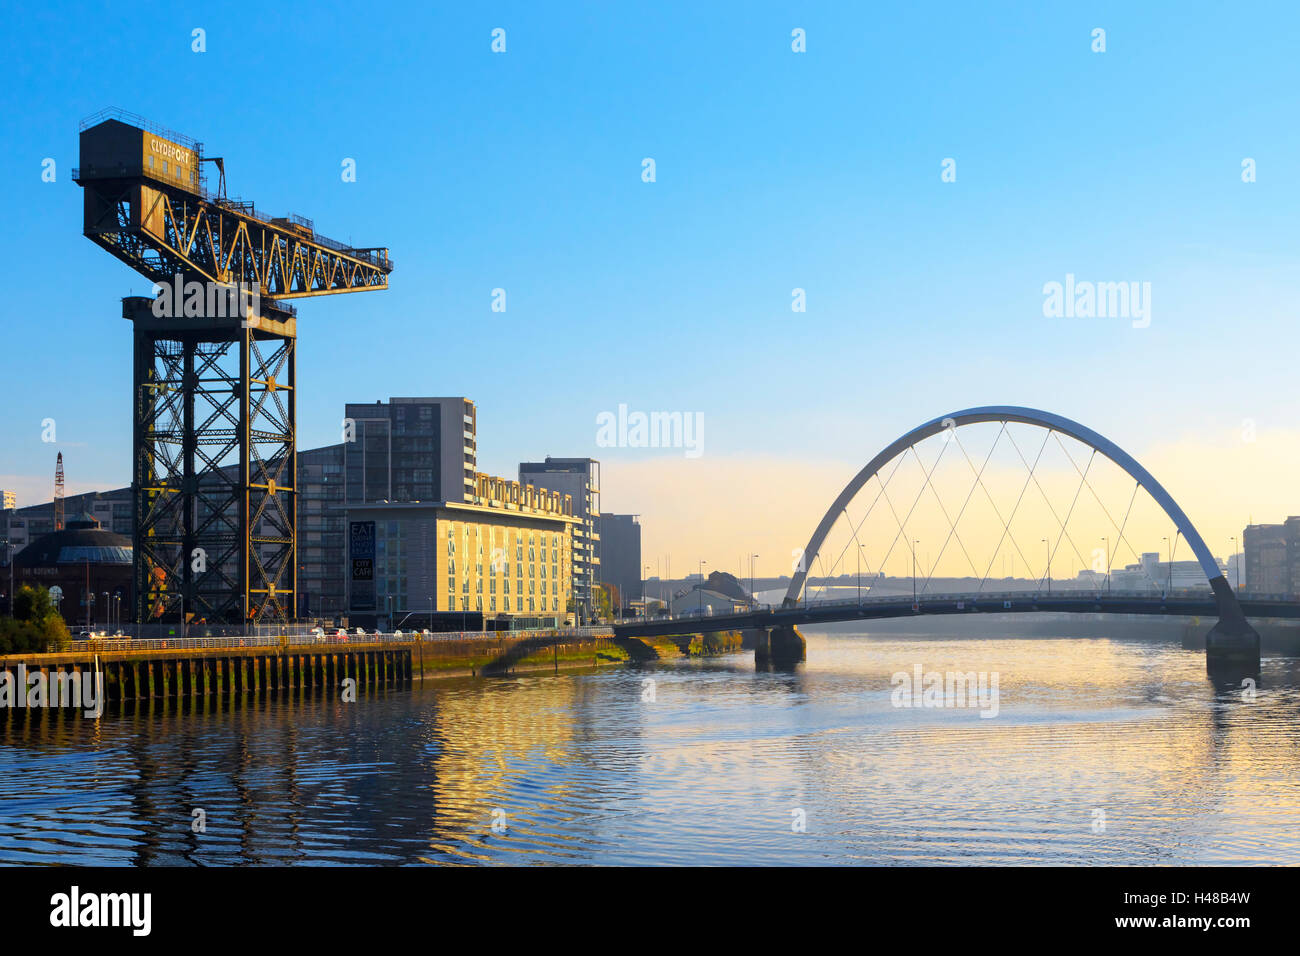 Early morning sunrise and mist over the River Clyde with the Anderston Crane and Arc (Squinty) Bridge, Glasgow, Scotland, UK Stock Photo